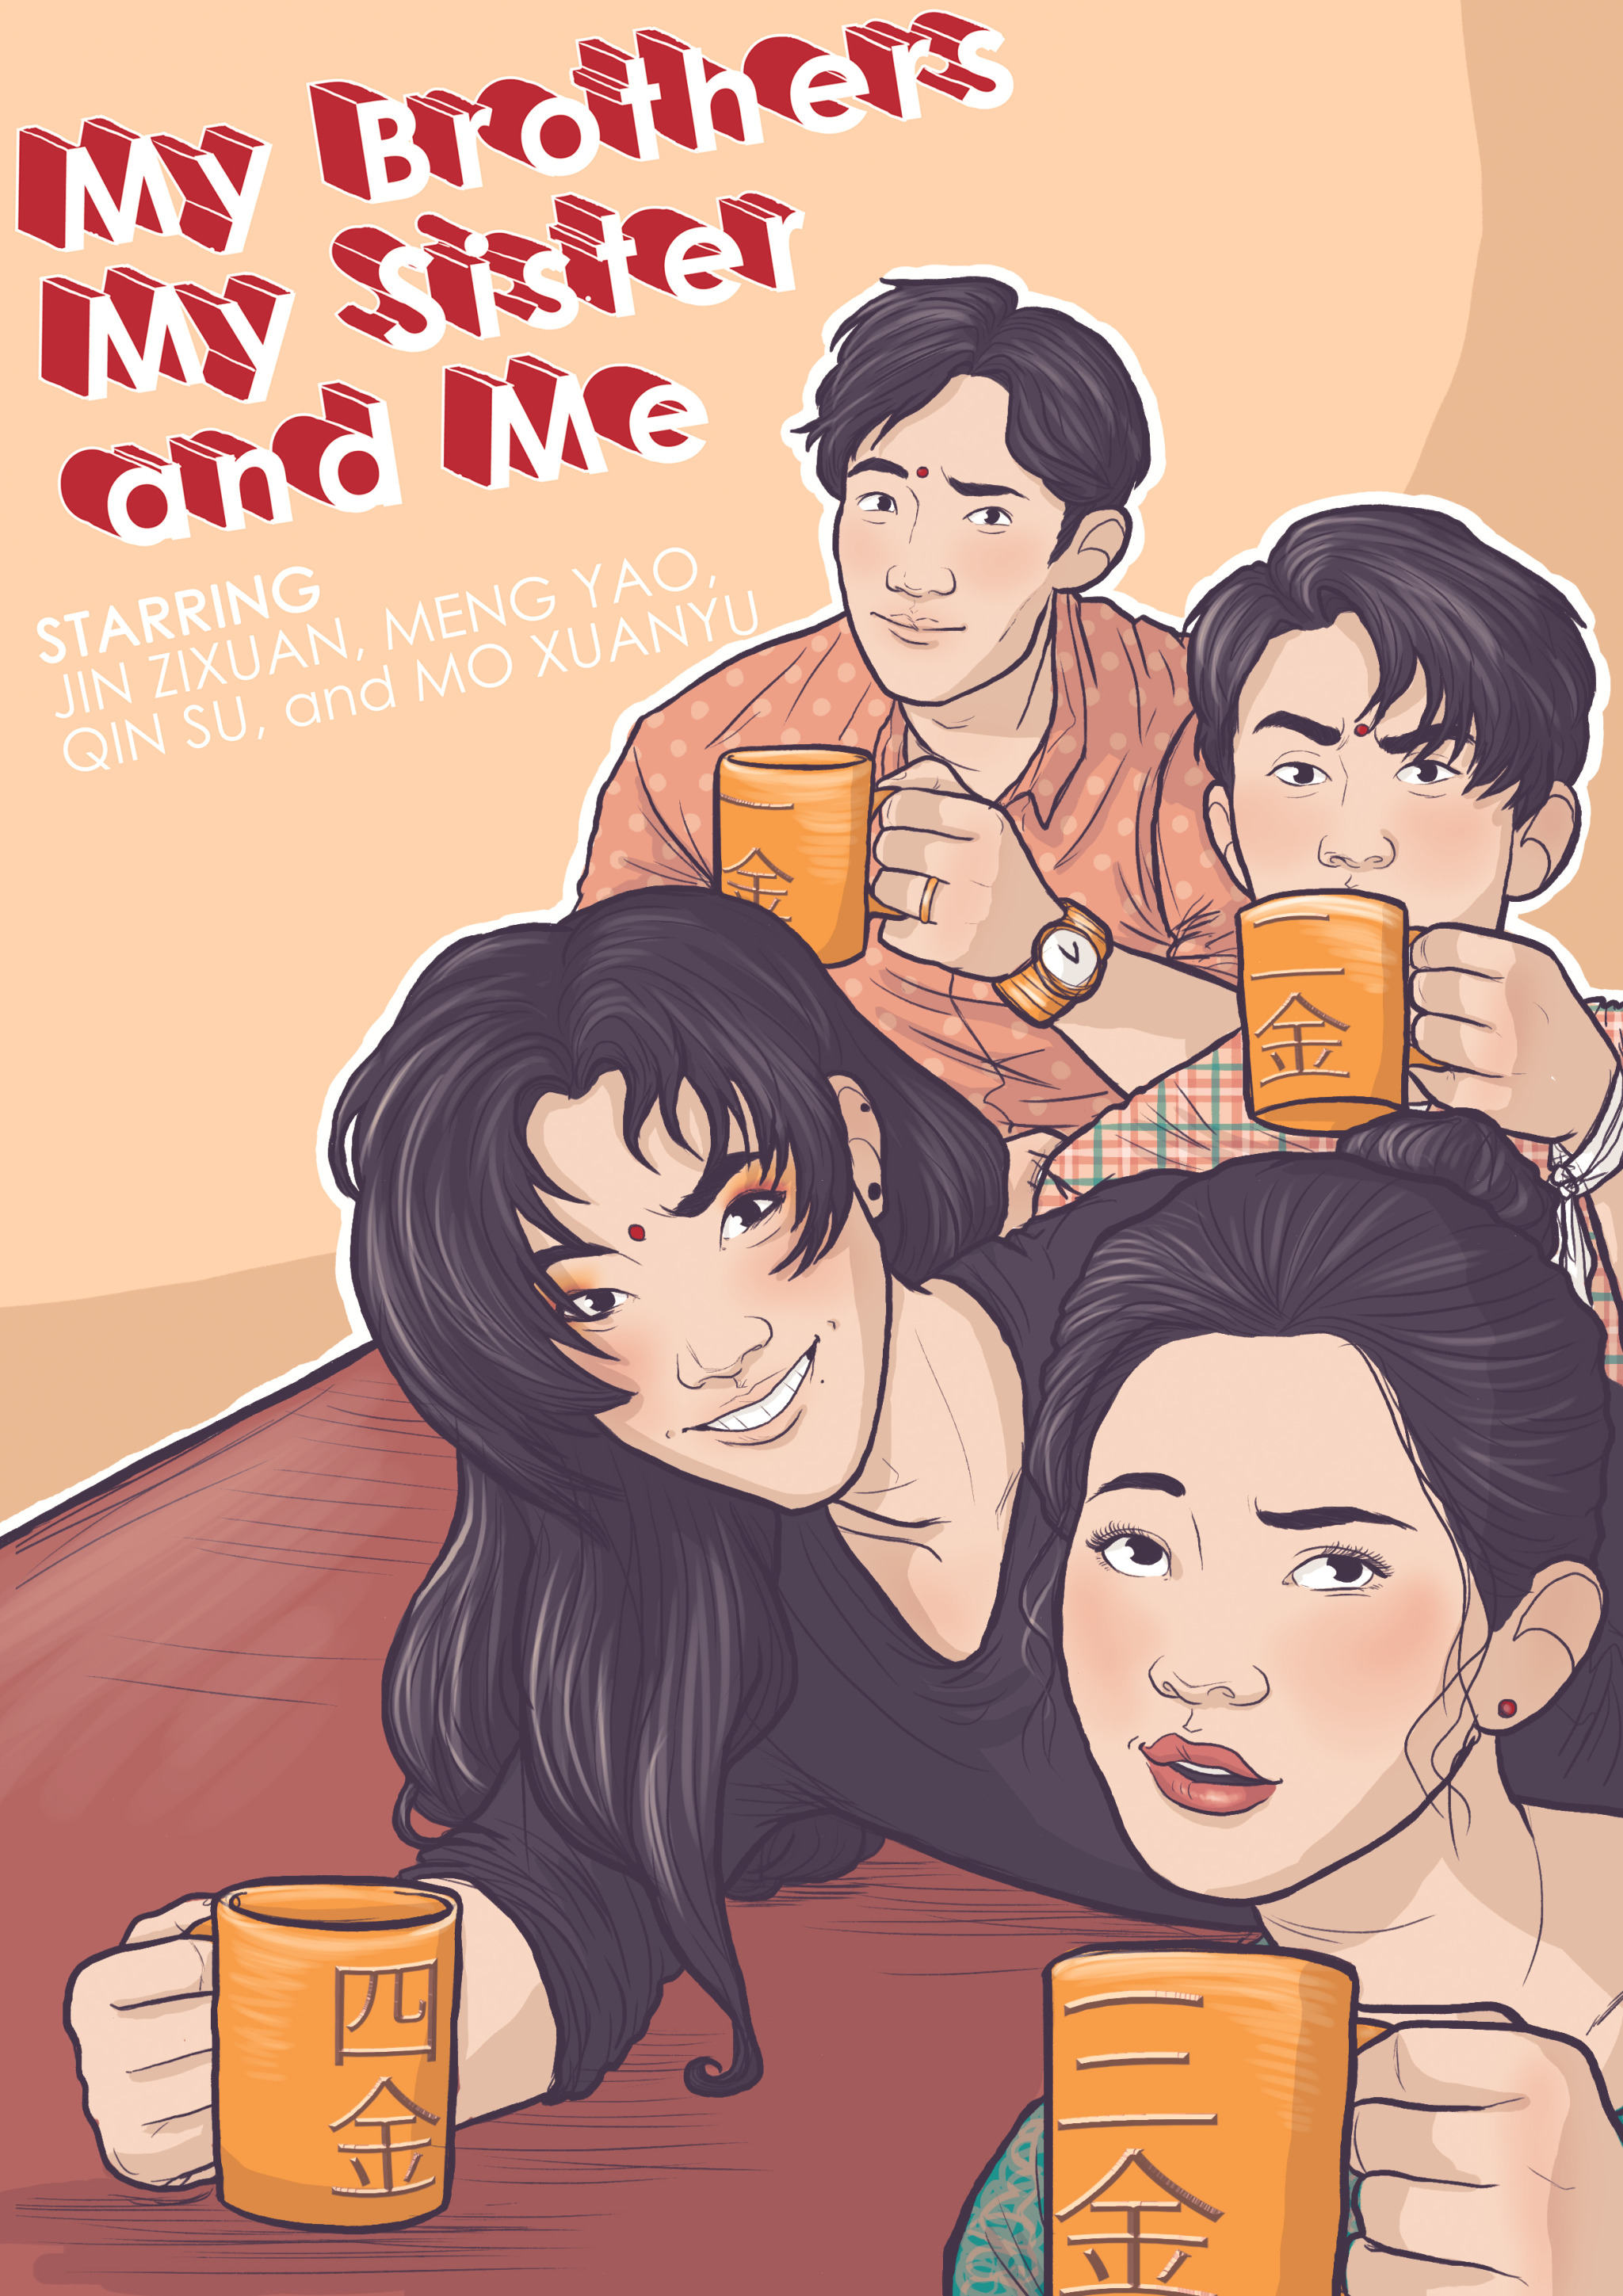 An image of the 4 Jin Siblings under a stylized My Brother, My Sisters, and Me logo. They resemble their actors in the drama and are looking at the camera with varying levels of amusement, each of them holding a gold mug that has the Chinese character for Jin and above it, the number of their birth order, also in Chinese. In order from the back of the picture, Jin Zixuan has 1, Meng Yao has 2, Mo Xuanyu has 4, and Qin Su has 3.]